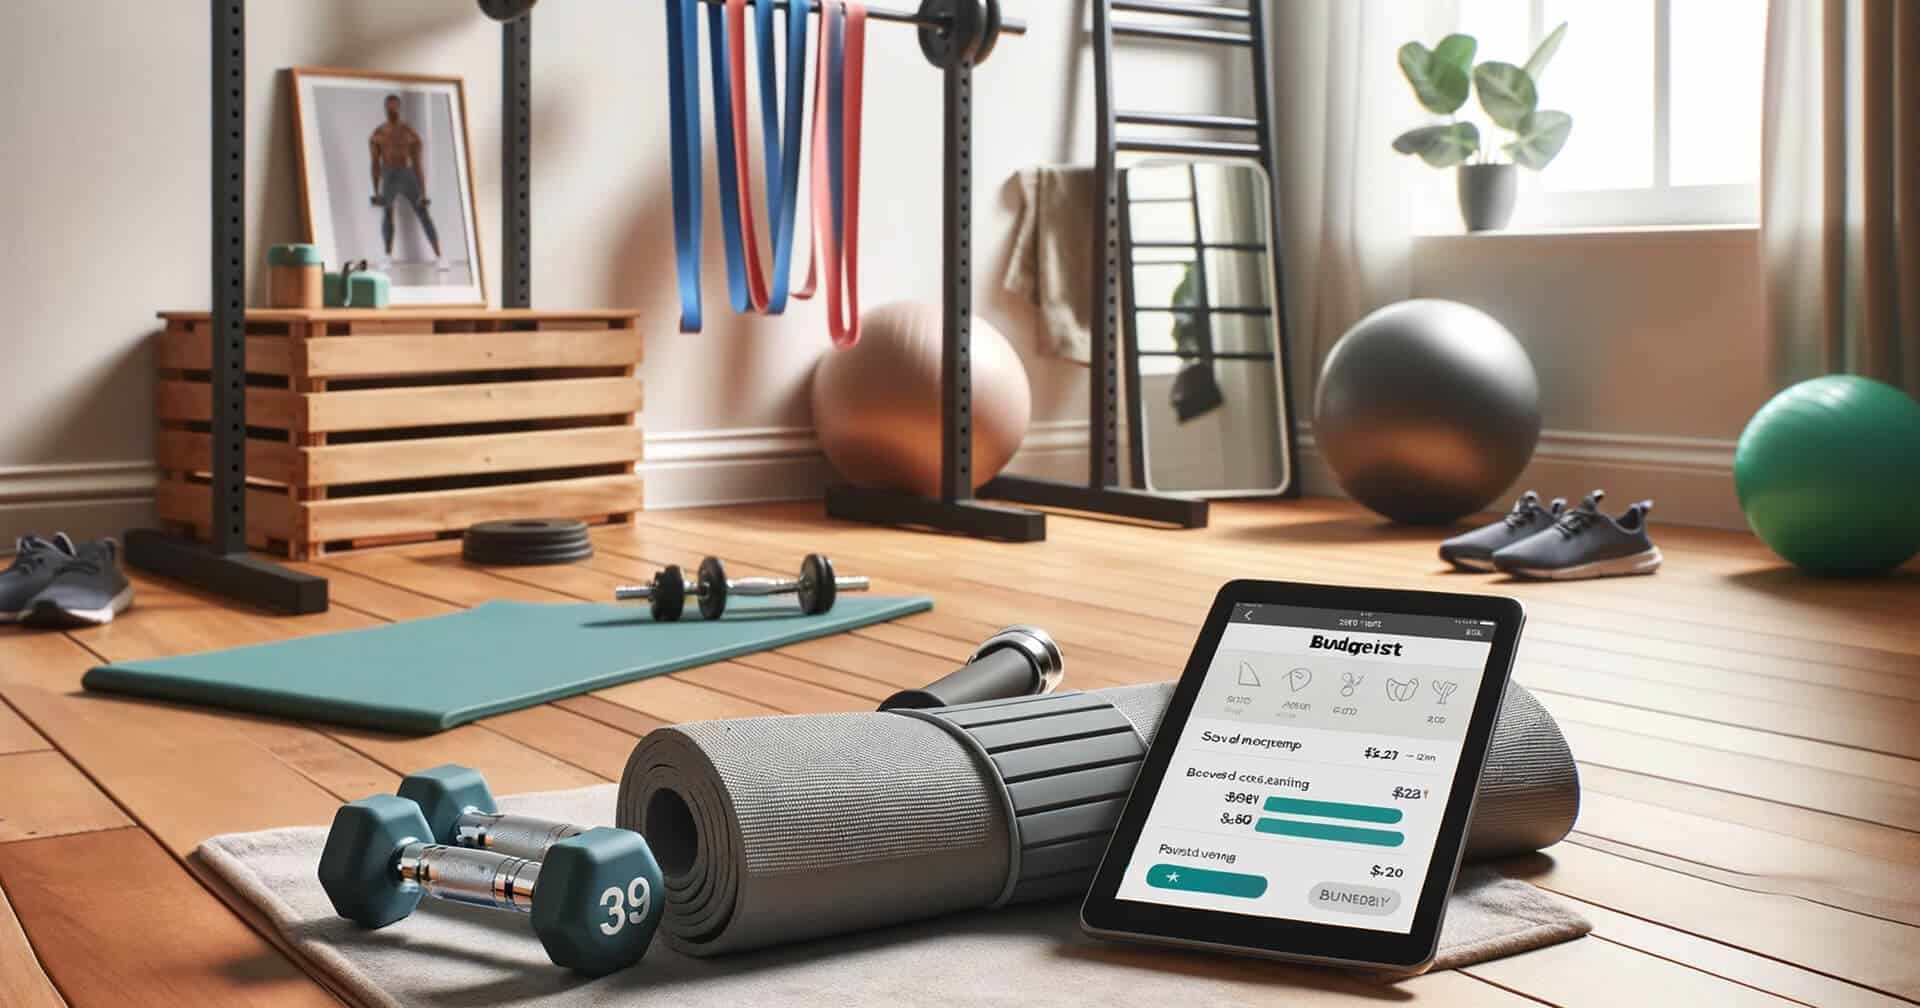 A gym room with a tablet for Sports & Fitness activities and dumbbells on the floor.